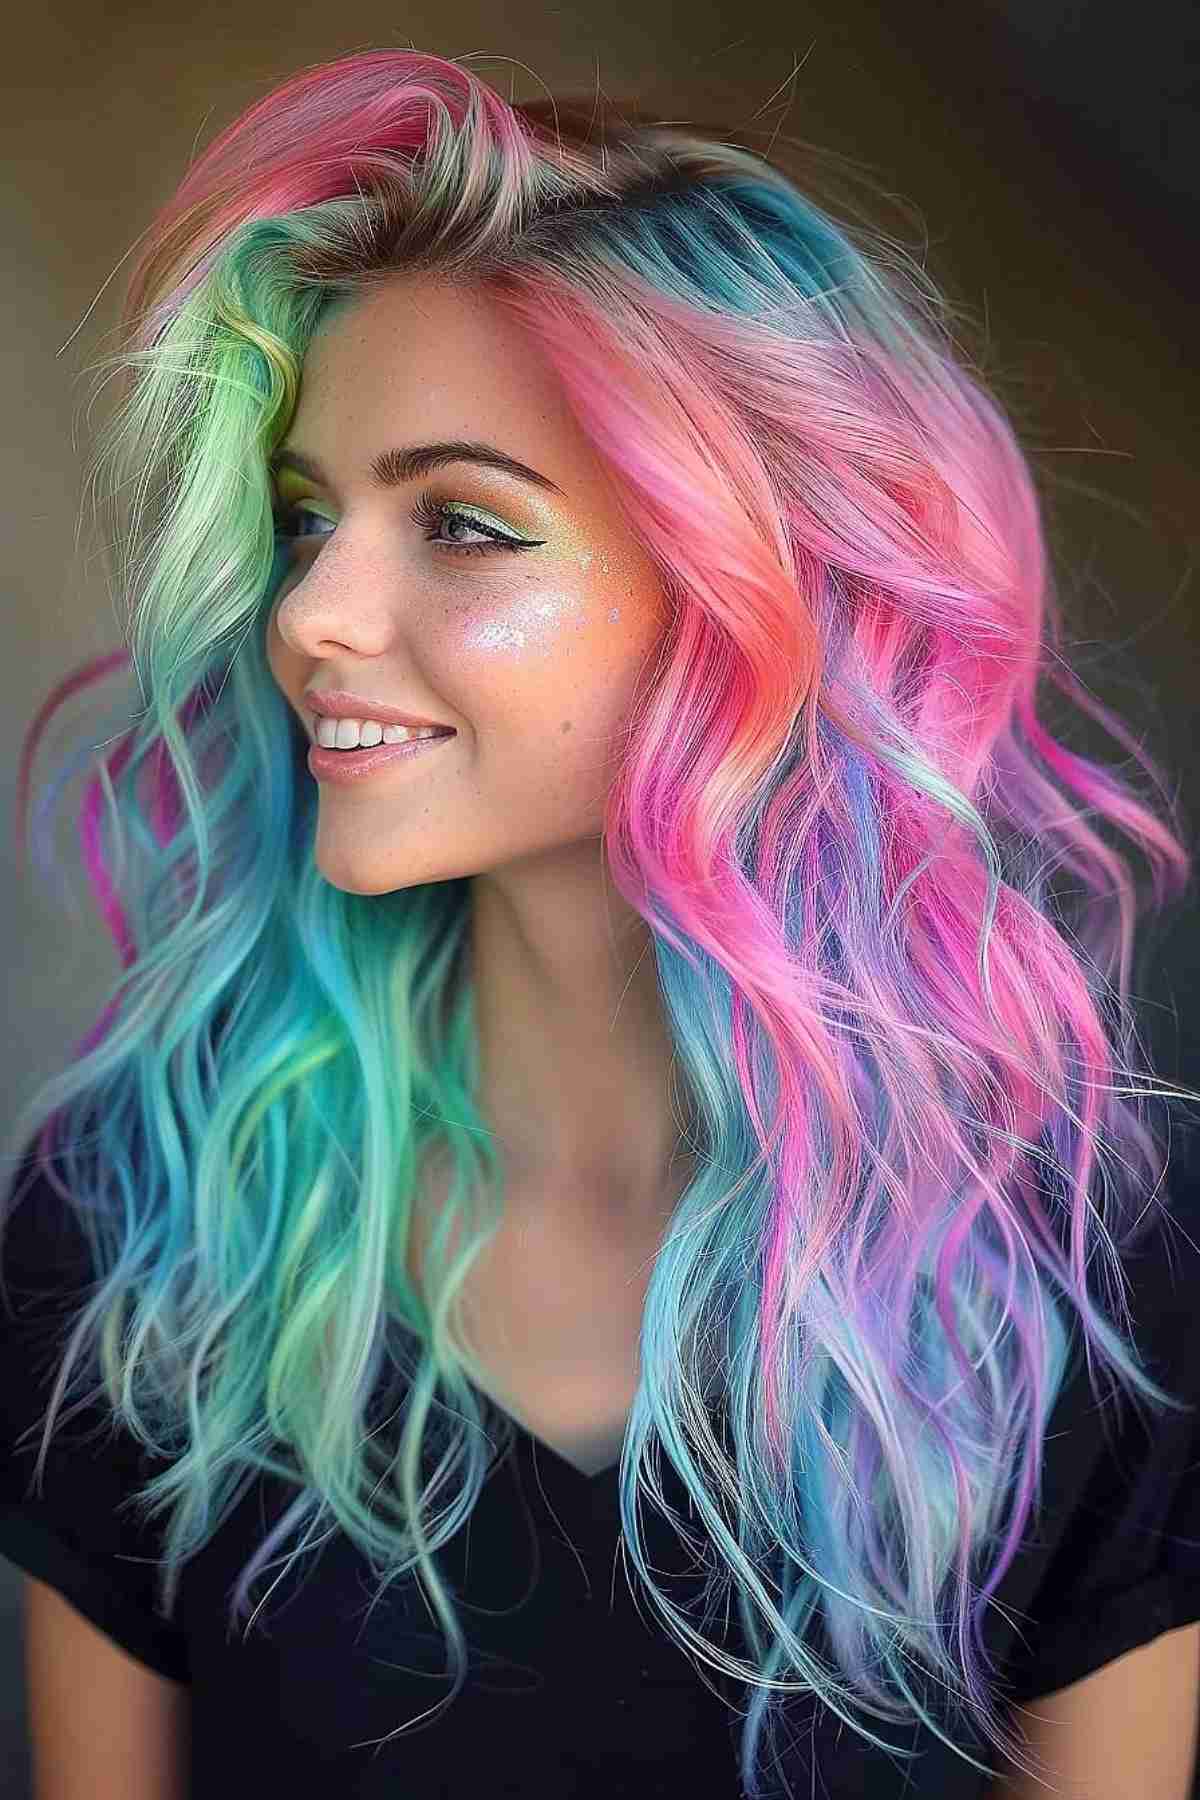 Long wavy hair with vibrant electric rainbow shades of pink, blue, and green.